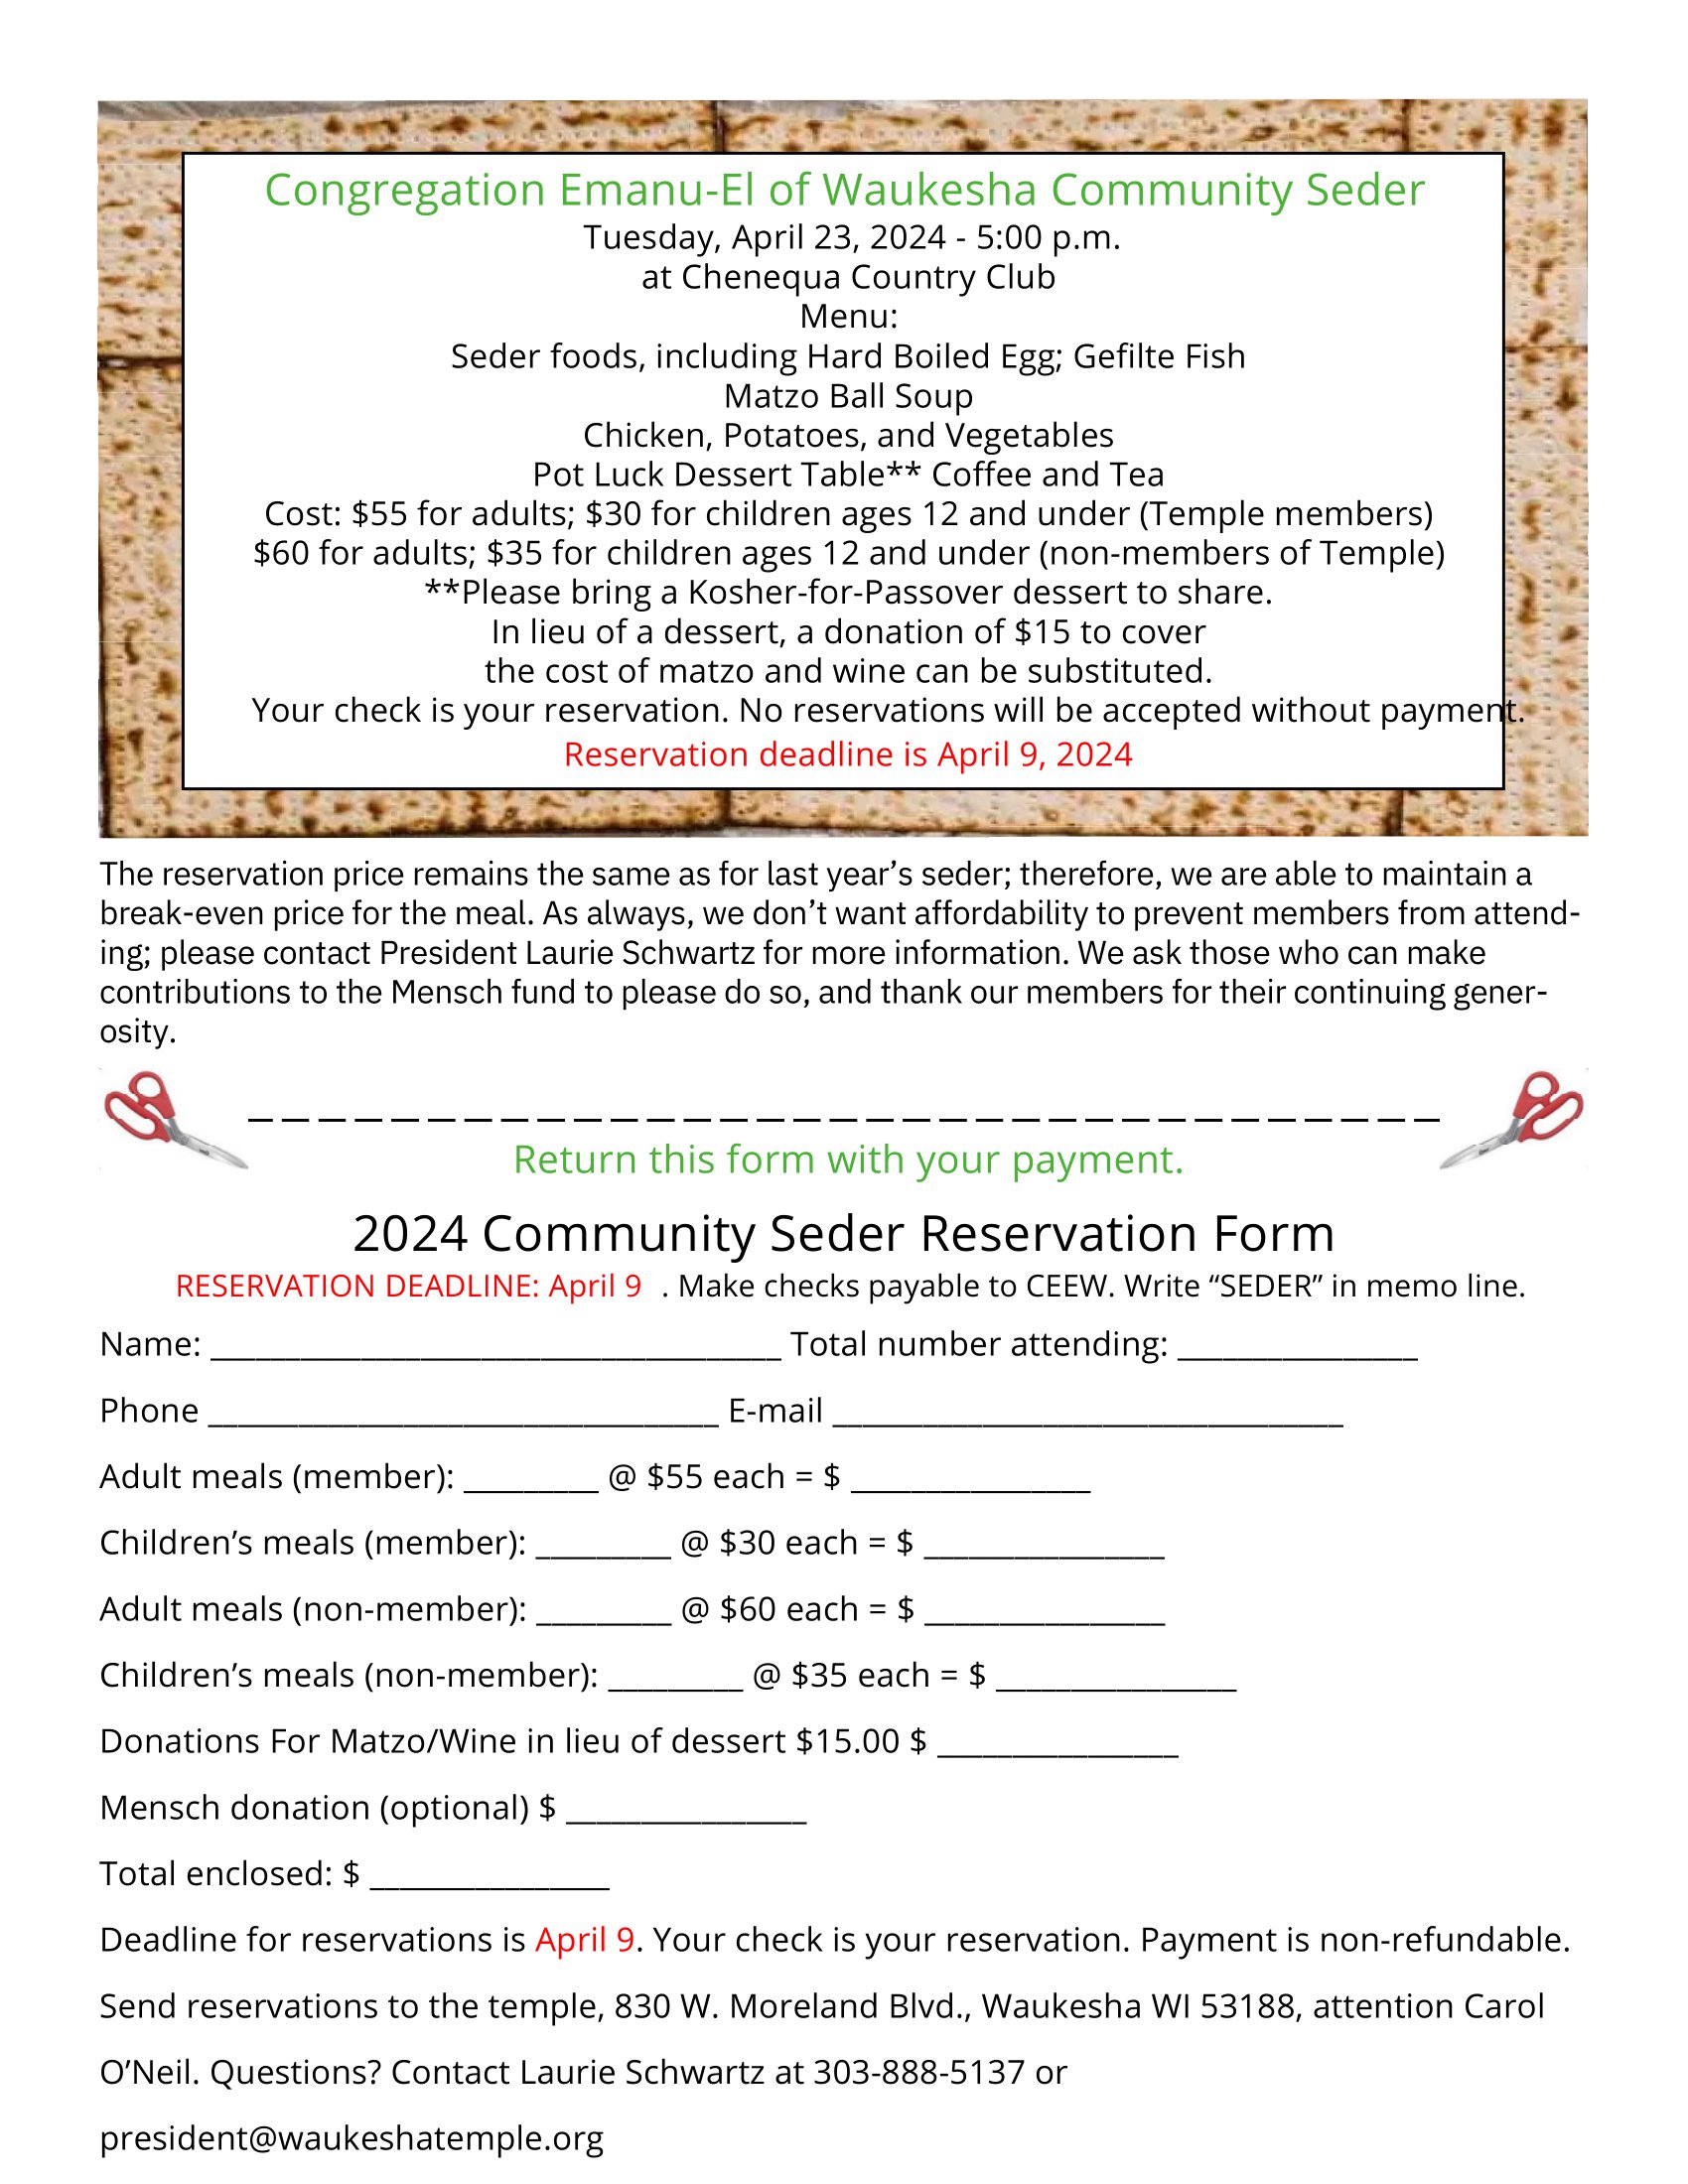 Passover Seder Reservations